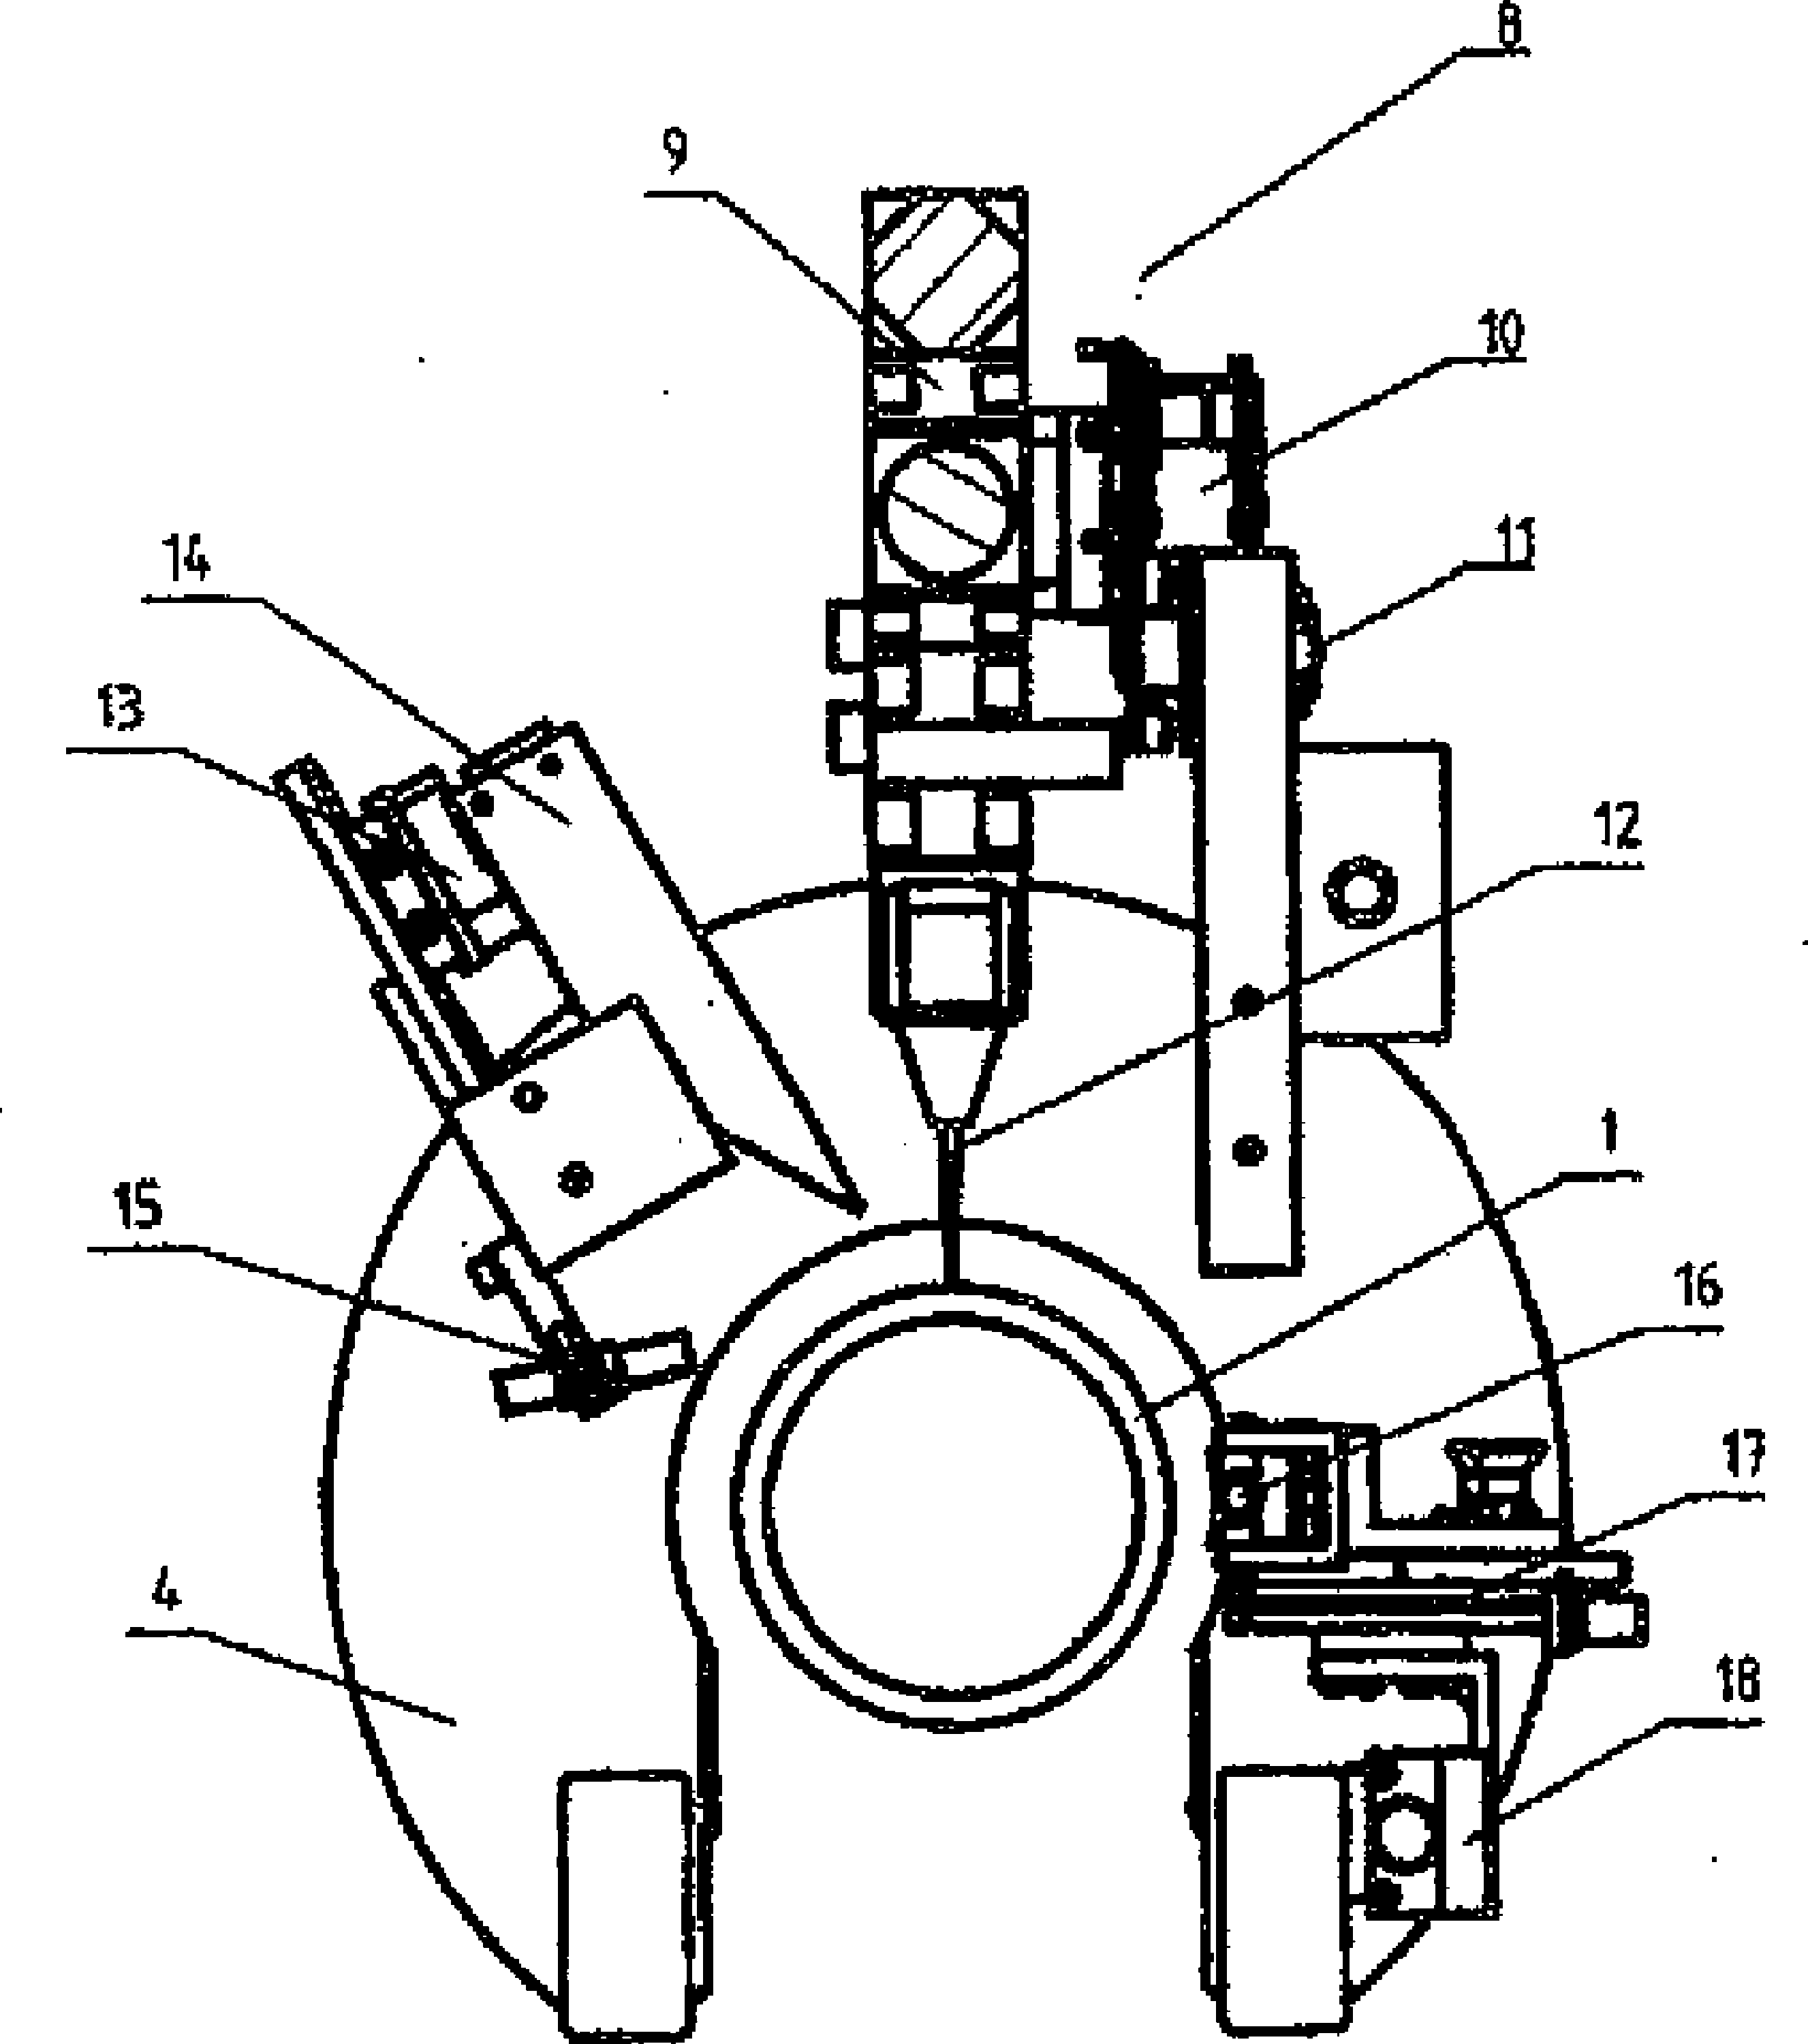 Device for connecting the ends of pipes made of steel by means of an orbital welding process